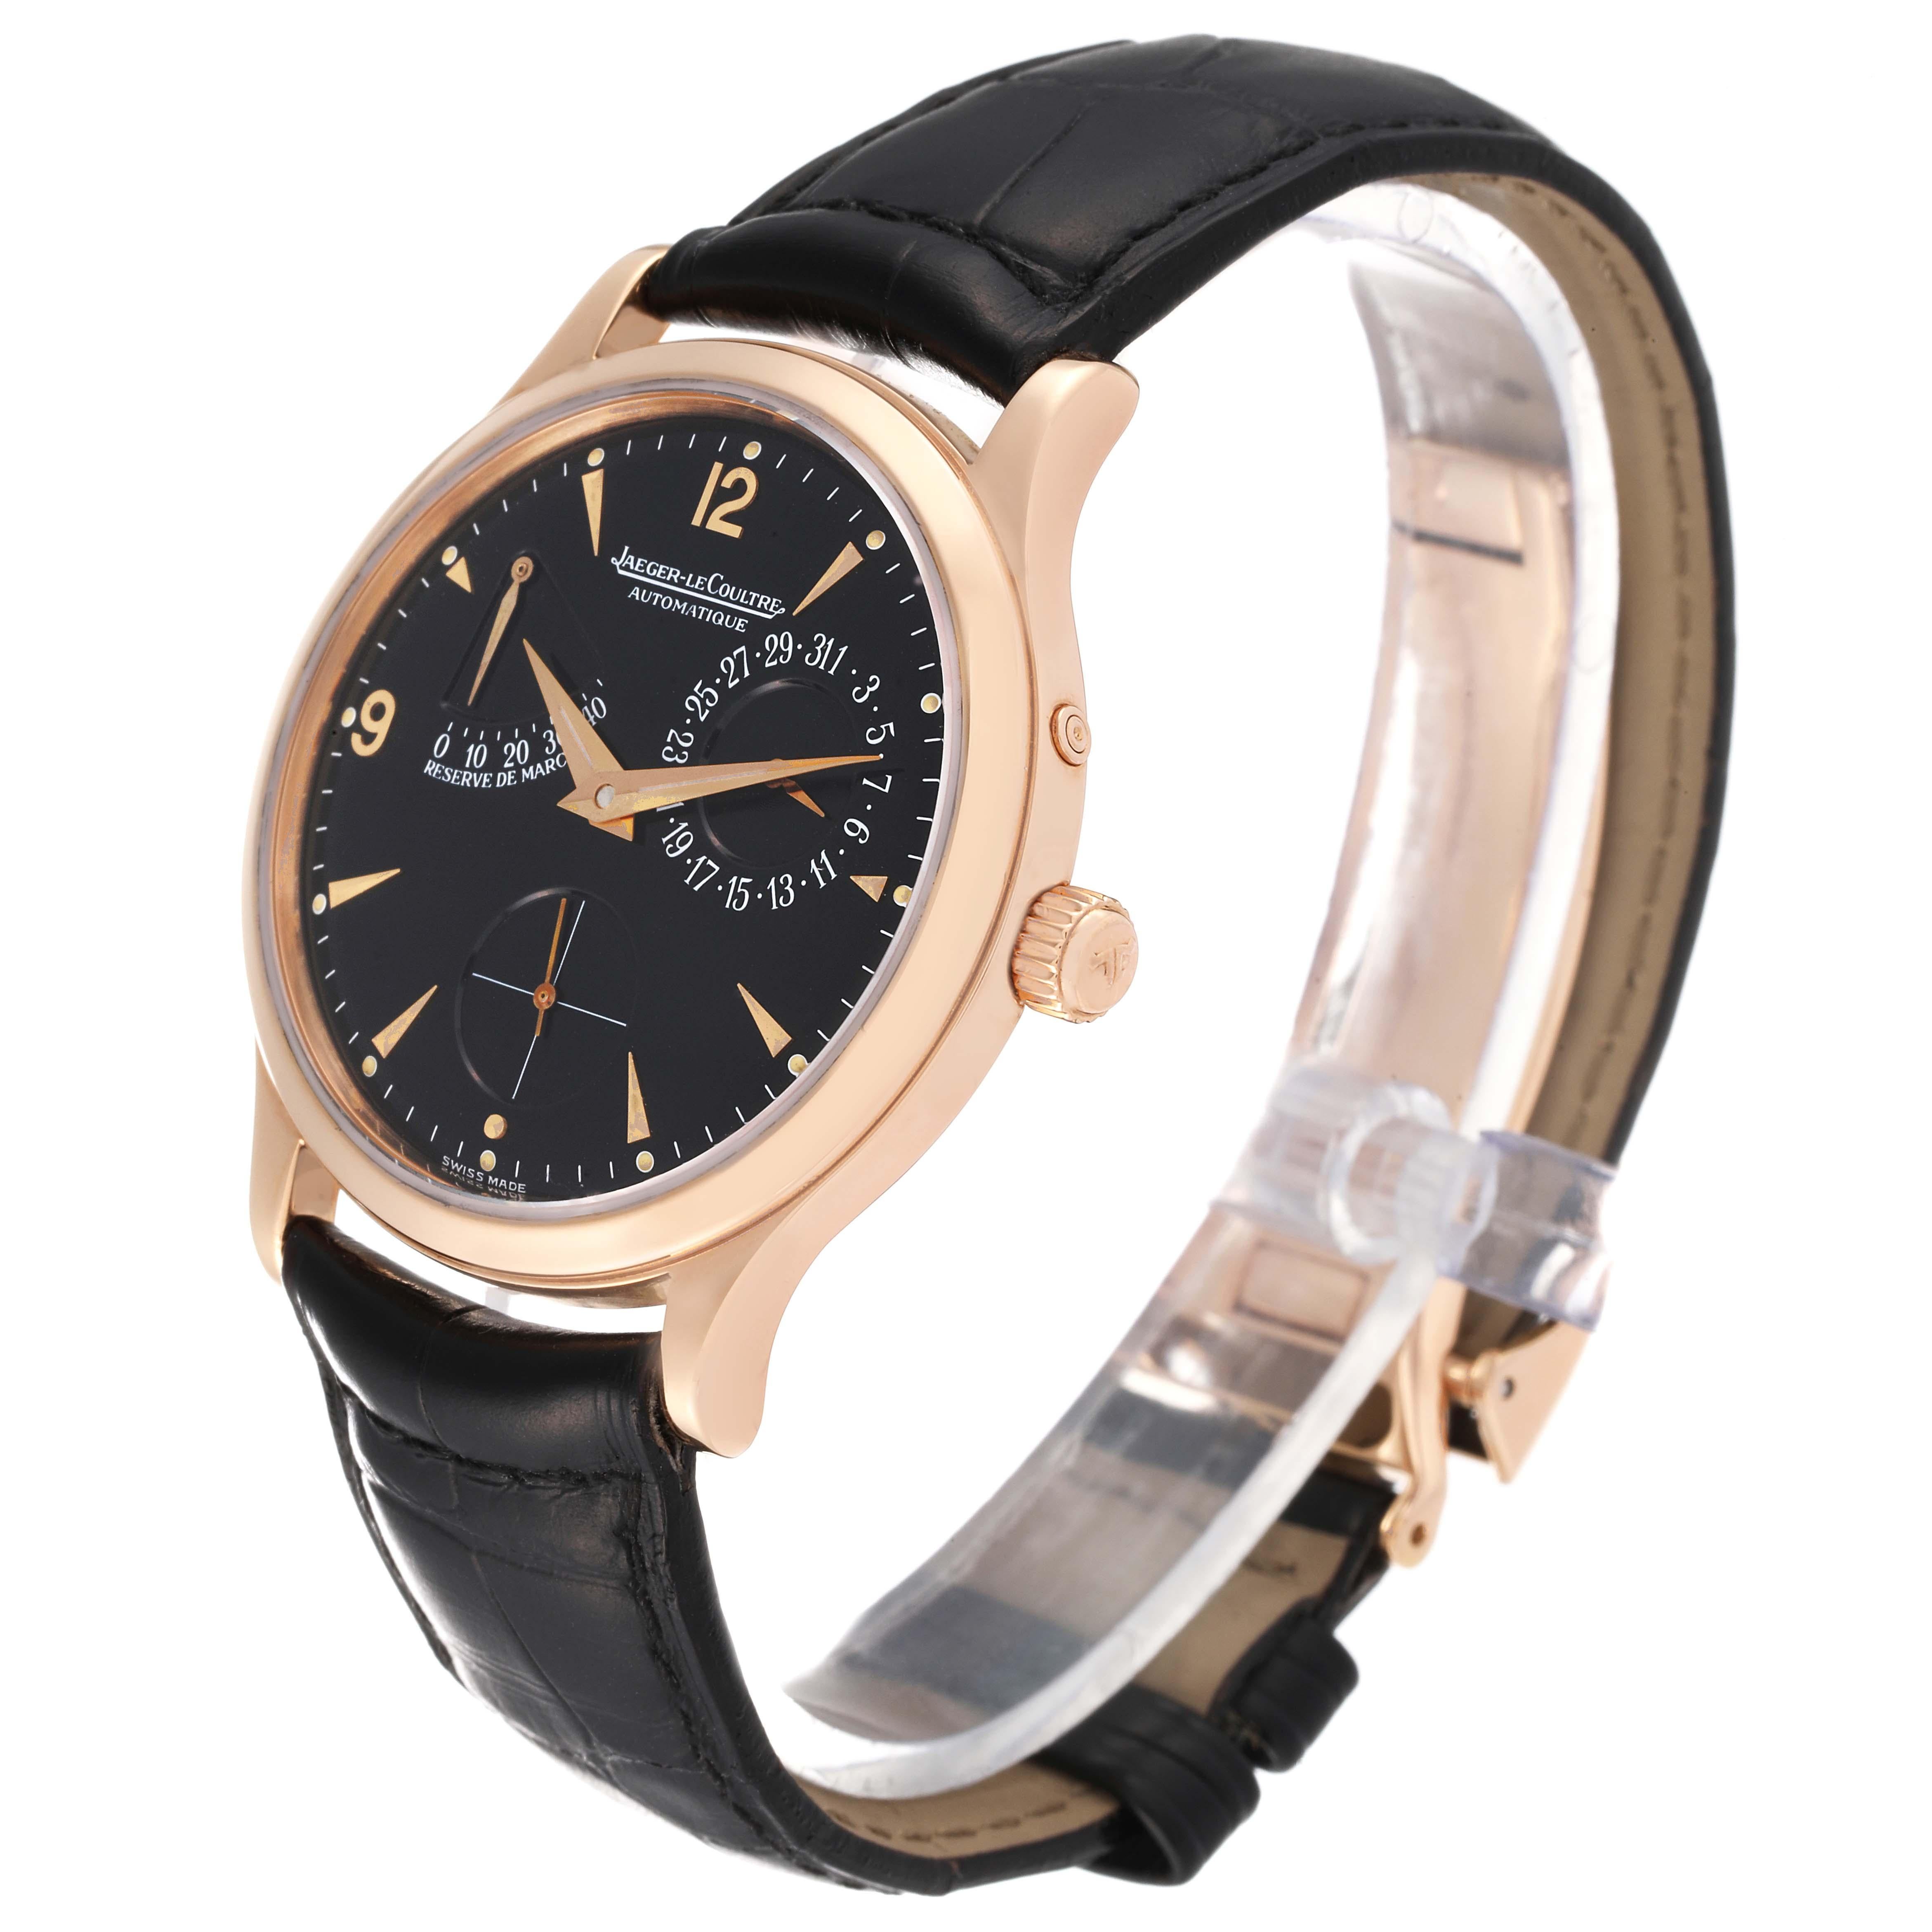 Jaeger LeCoultre Master Reserve De Marche Rose Gold Watch 140.2.93  In Excellent Condition For Sale In Atlanta, GA